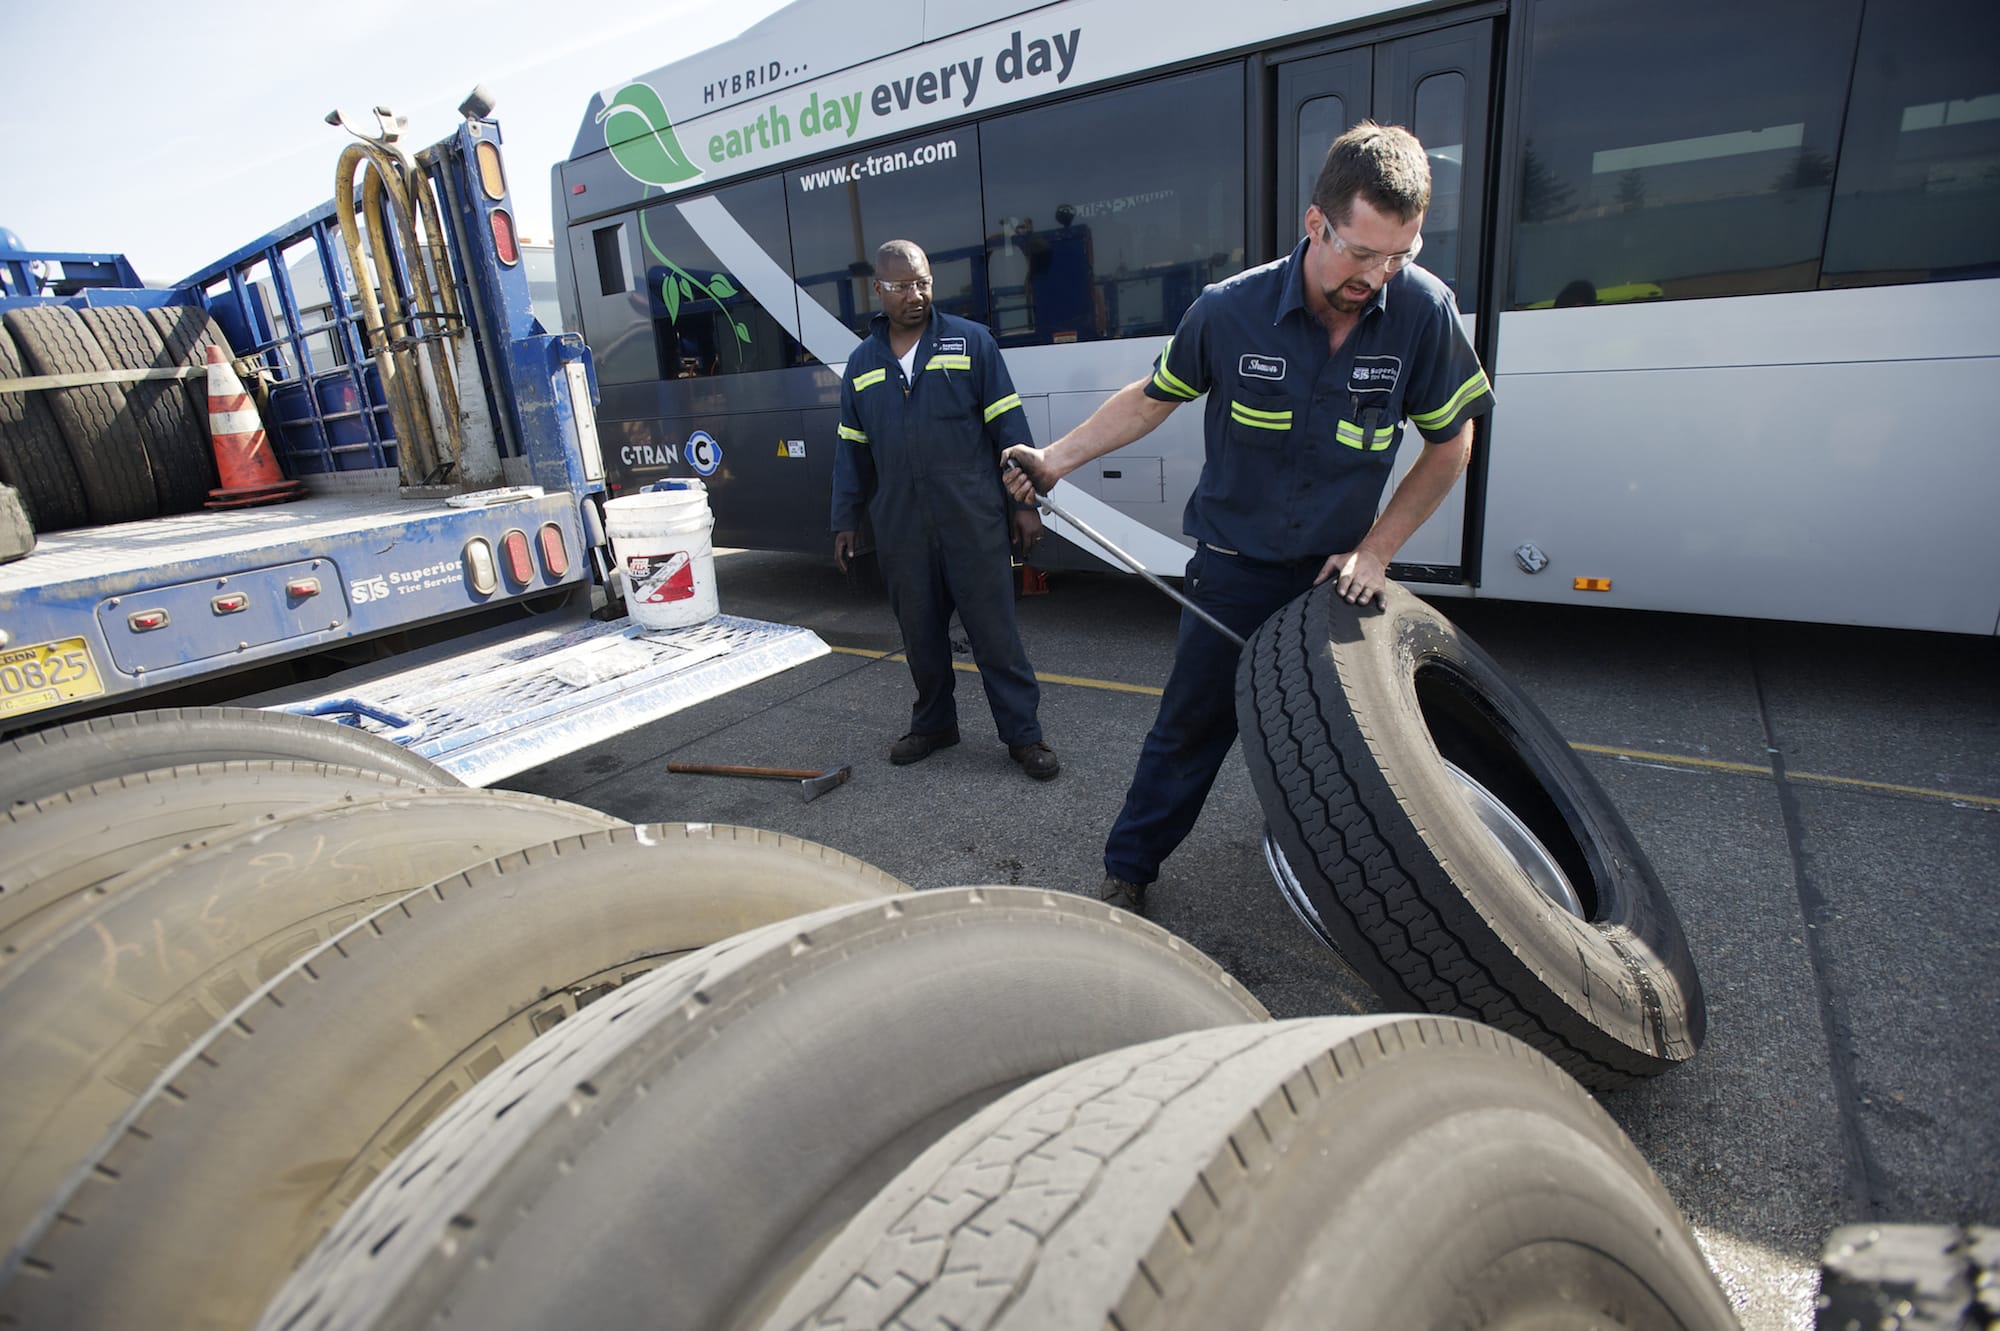 Photos by Steven Lane/The Columbian
Superior Tire Service workers Shawn Paulus, right, and Kapaya Goodson replace faulty tires on a C-Tran bus this week. The agency raced to replace hundreds of tires recently recalled by Michelin.